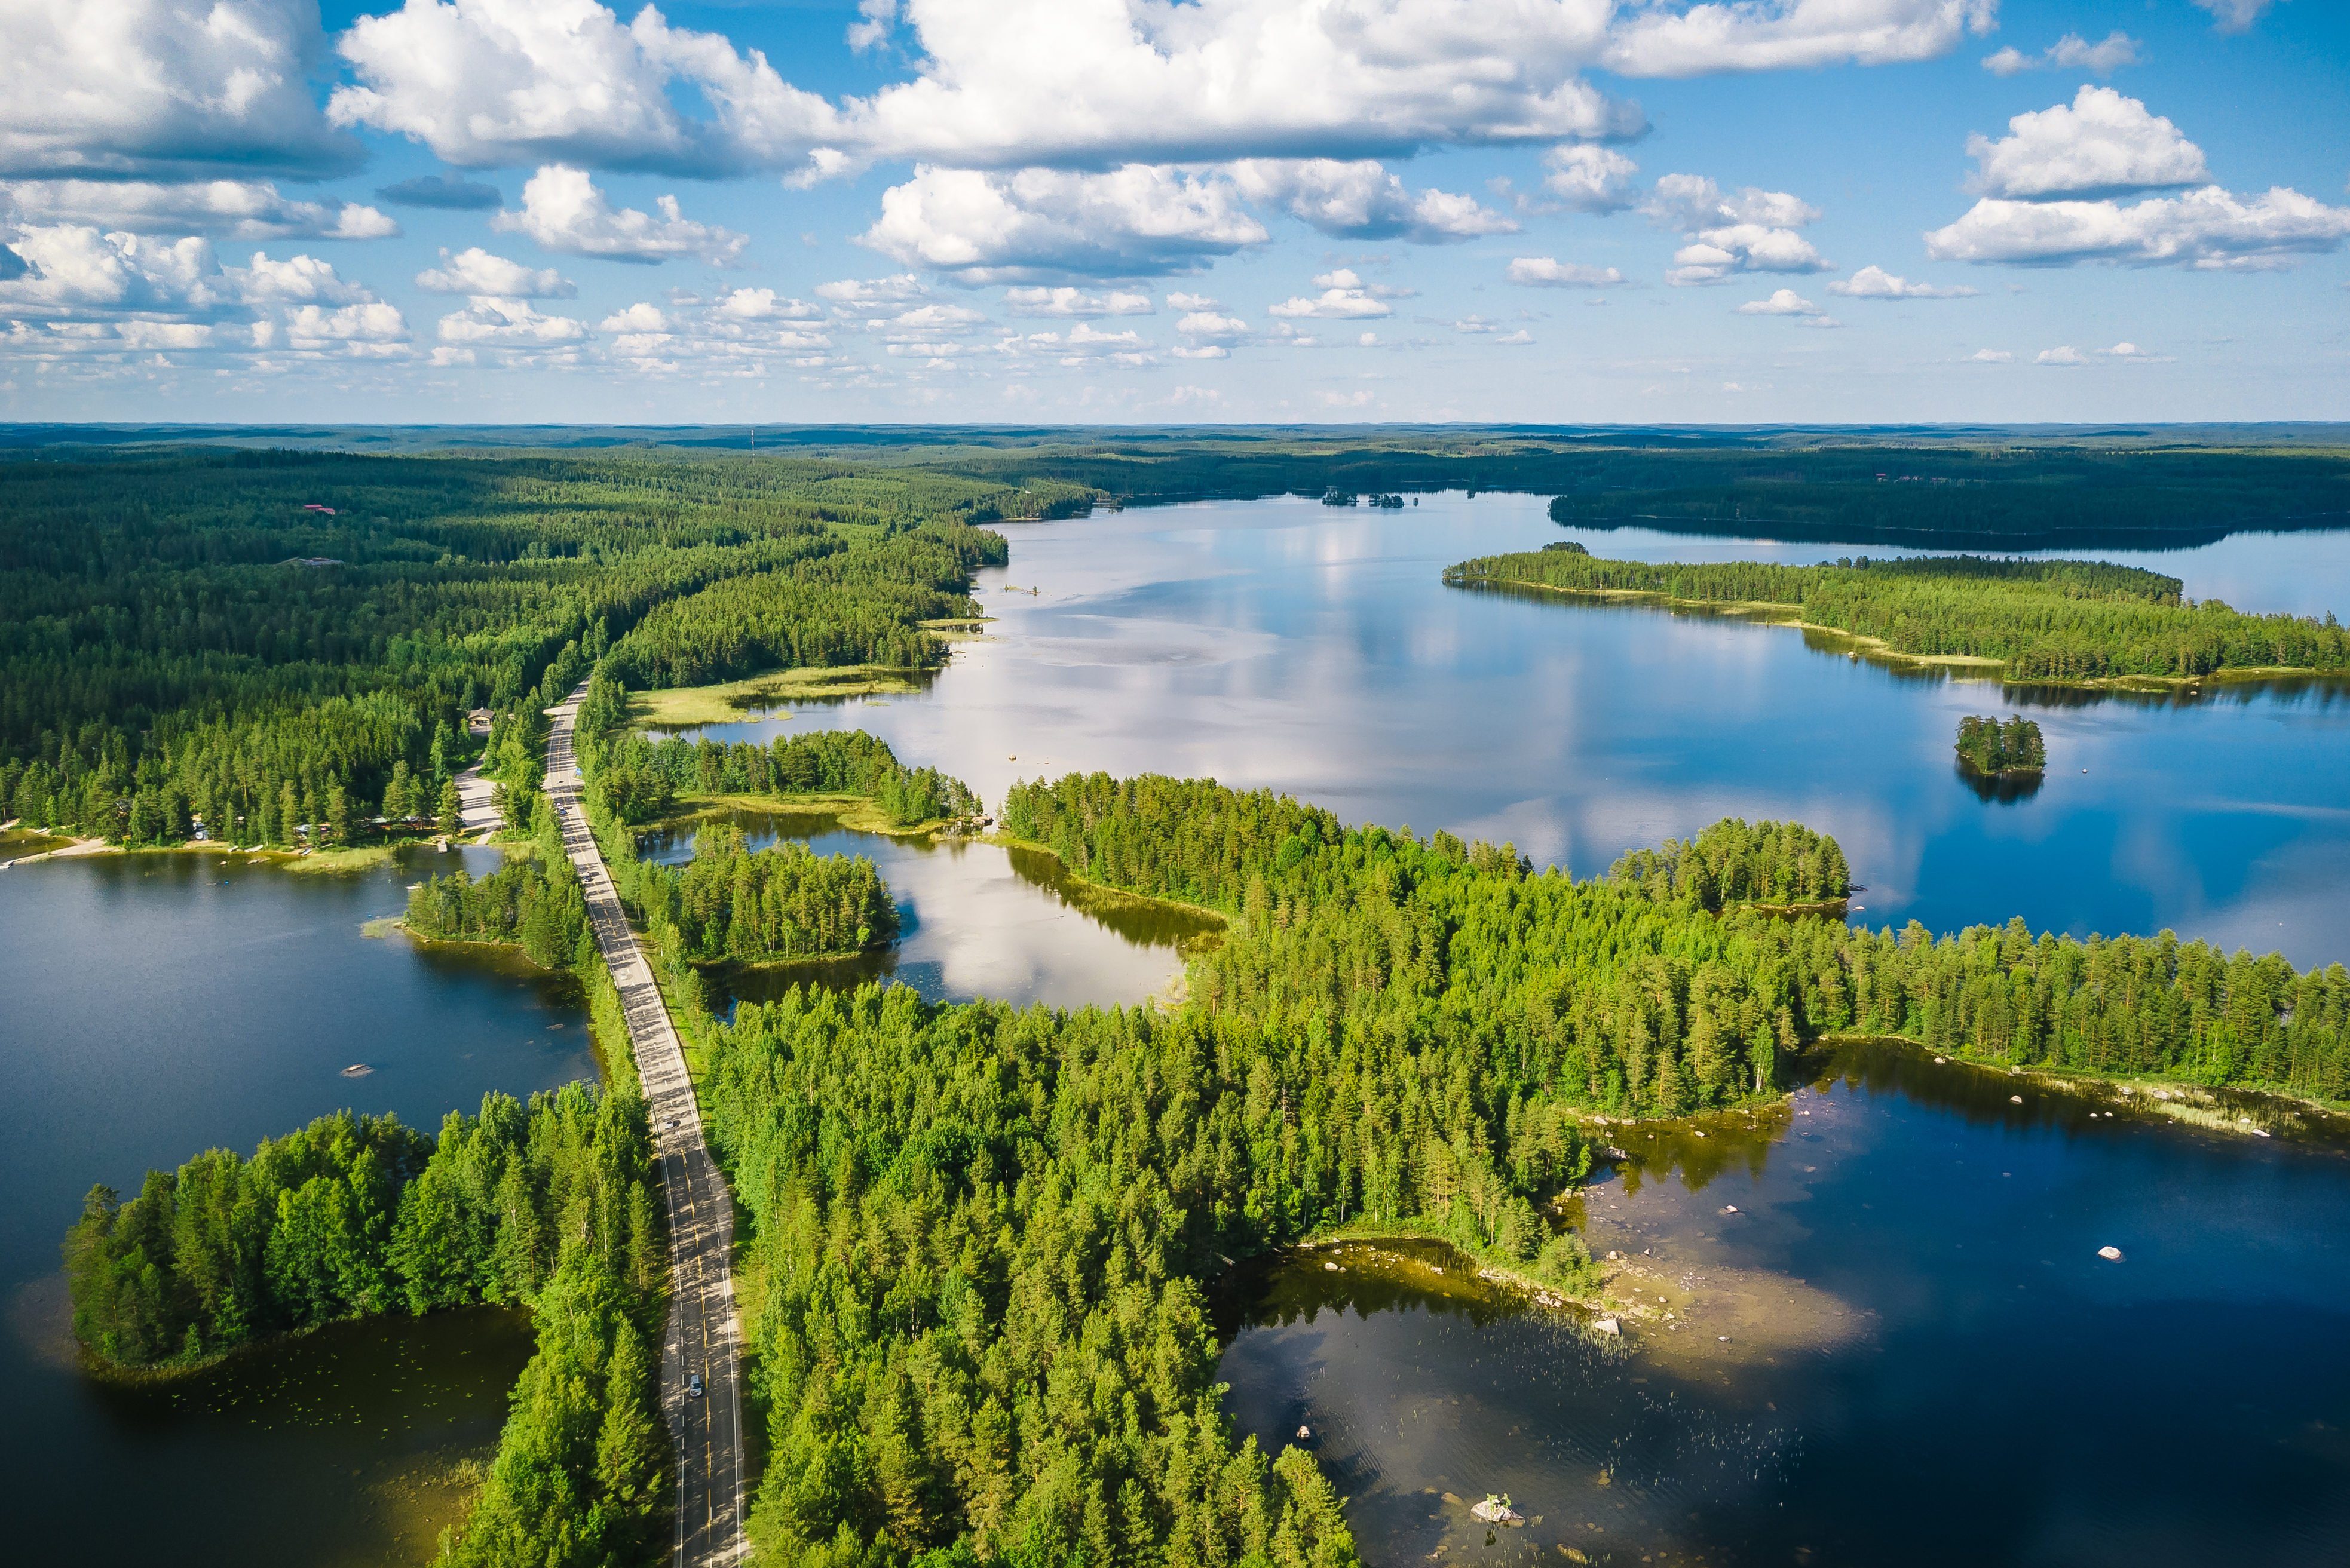 Aerial view of a winding road passing through forests & lakes in Finland on a summer day